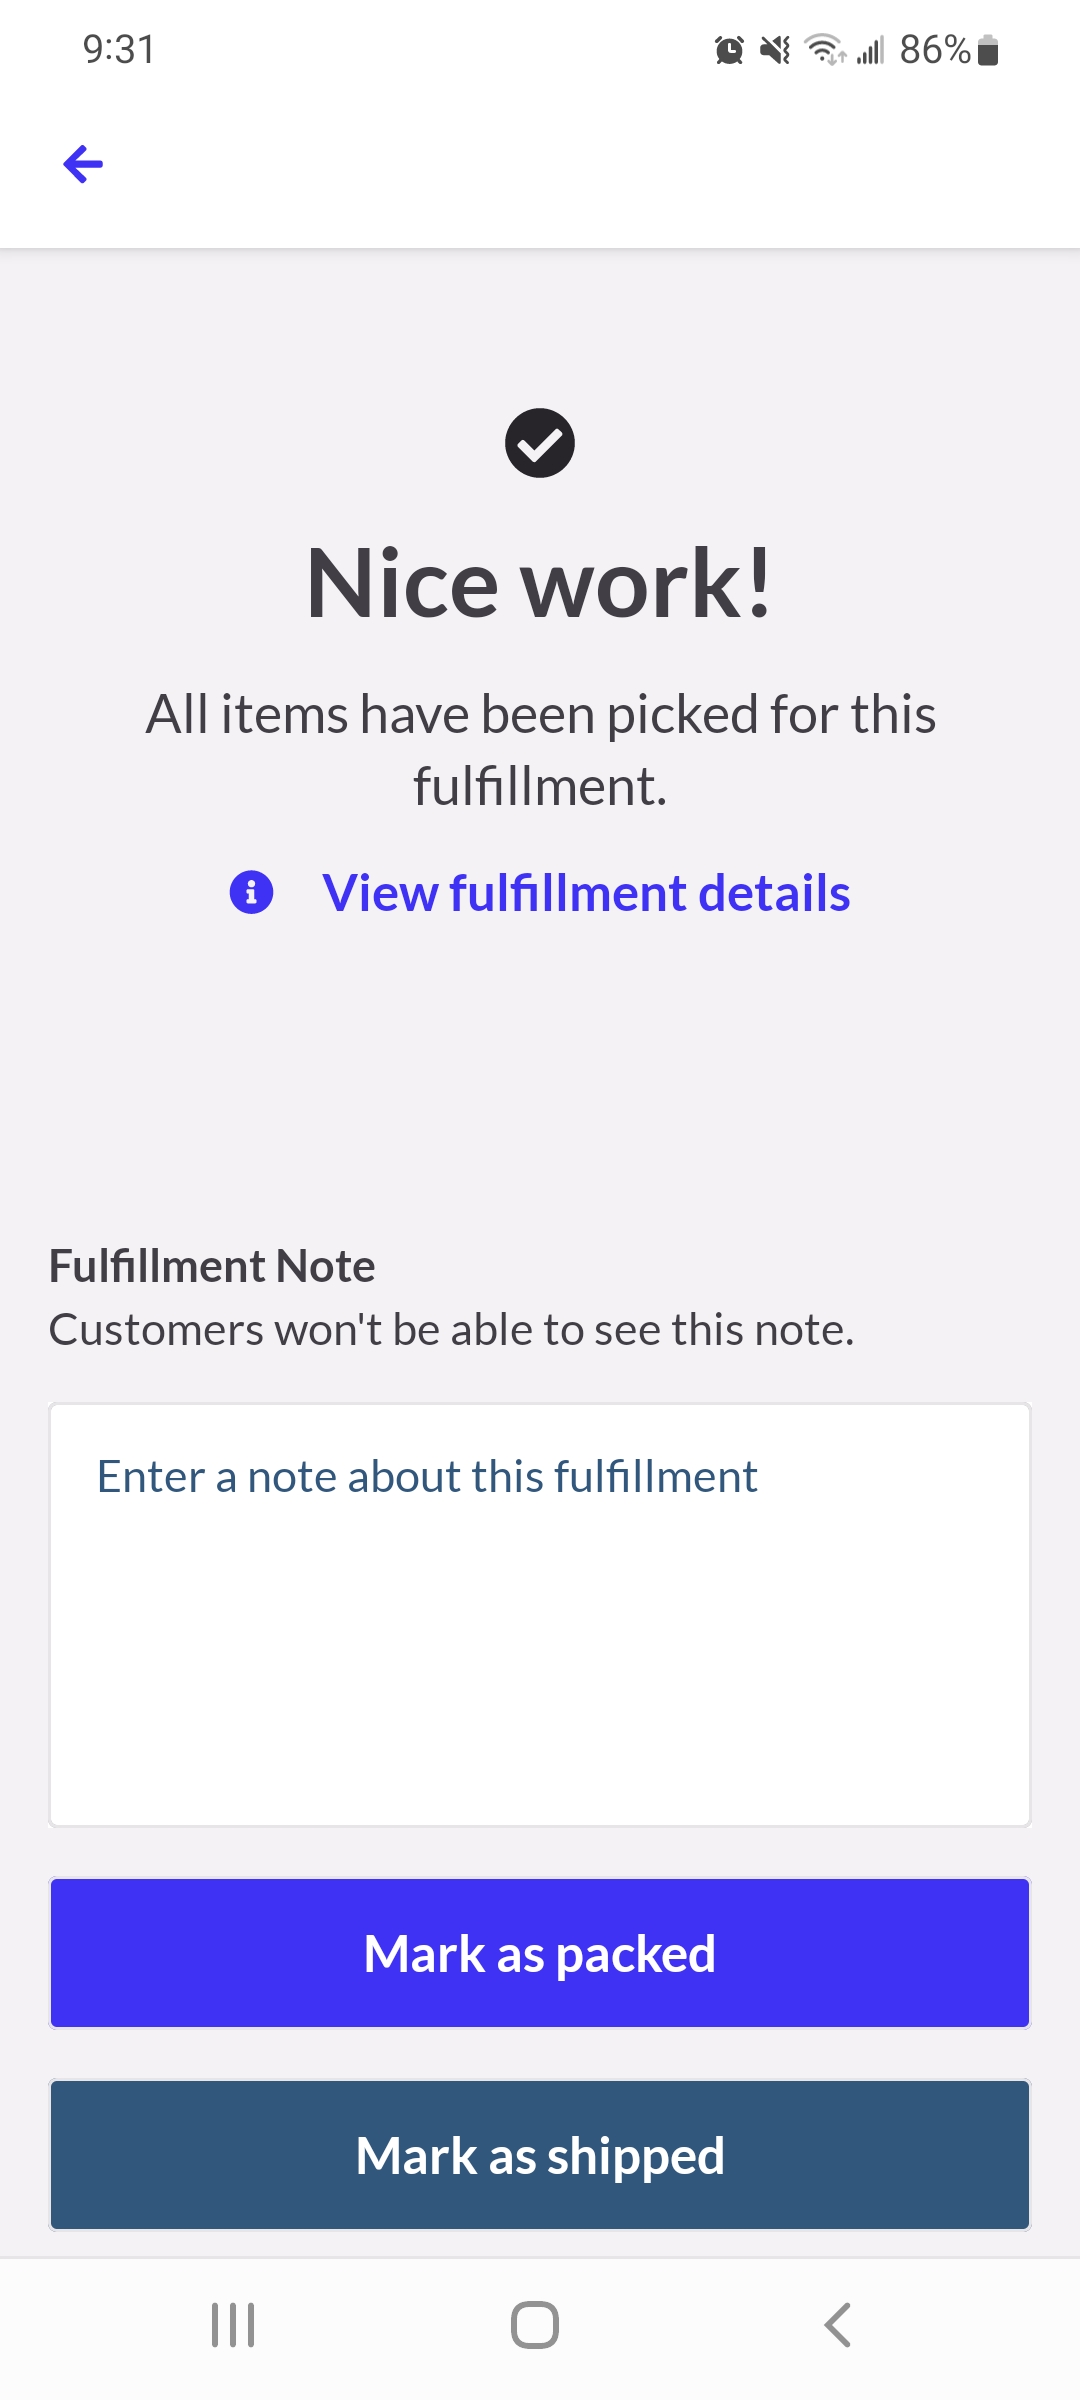 Pick completed screen. Option to click mark as packed or mark as shipped.